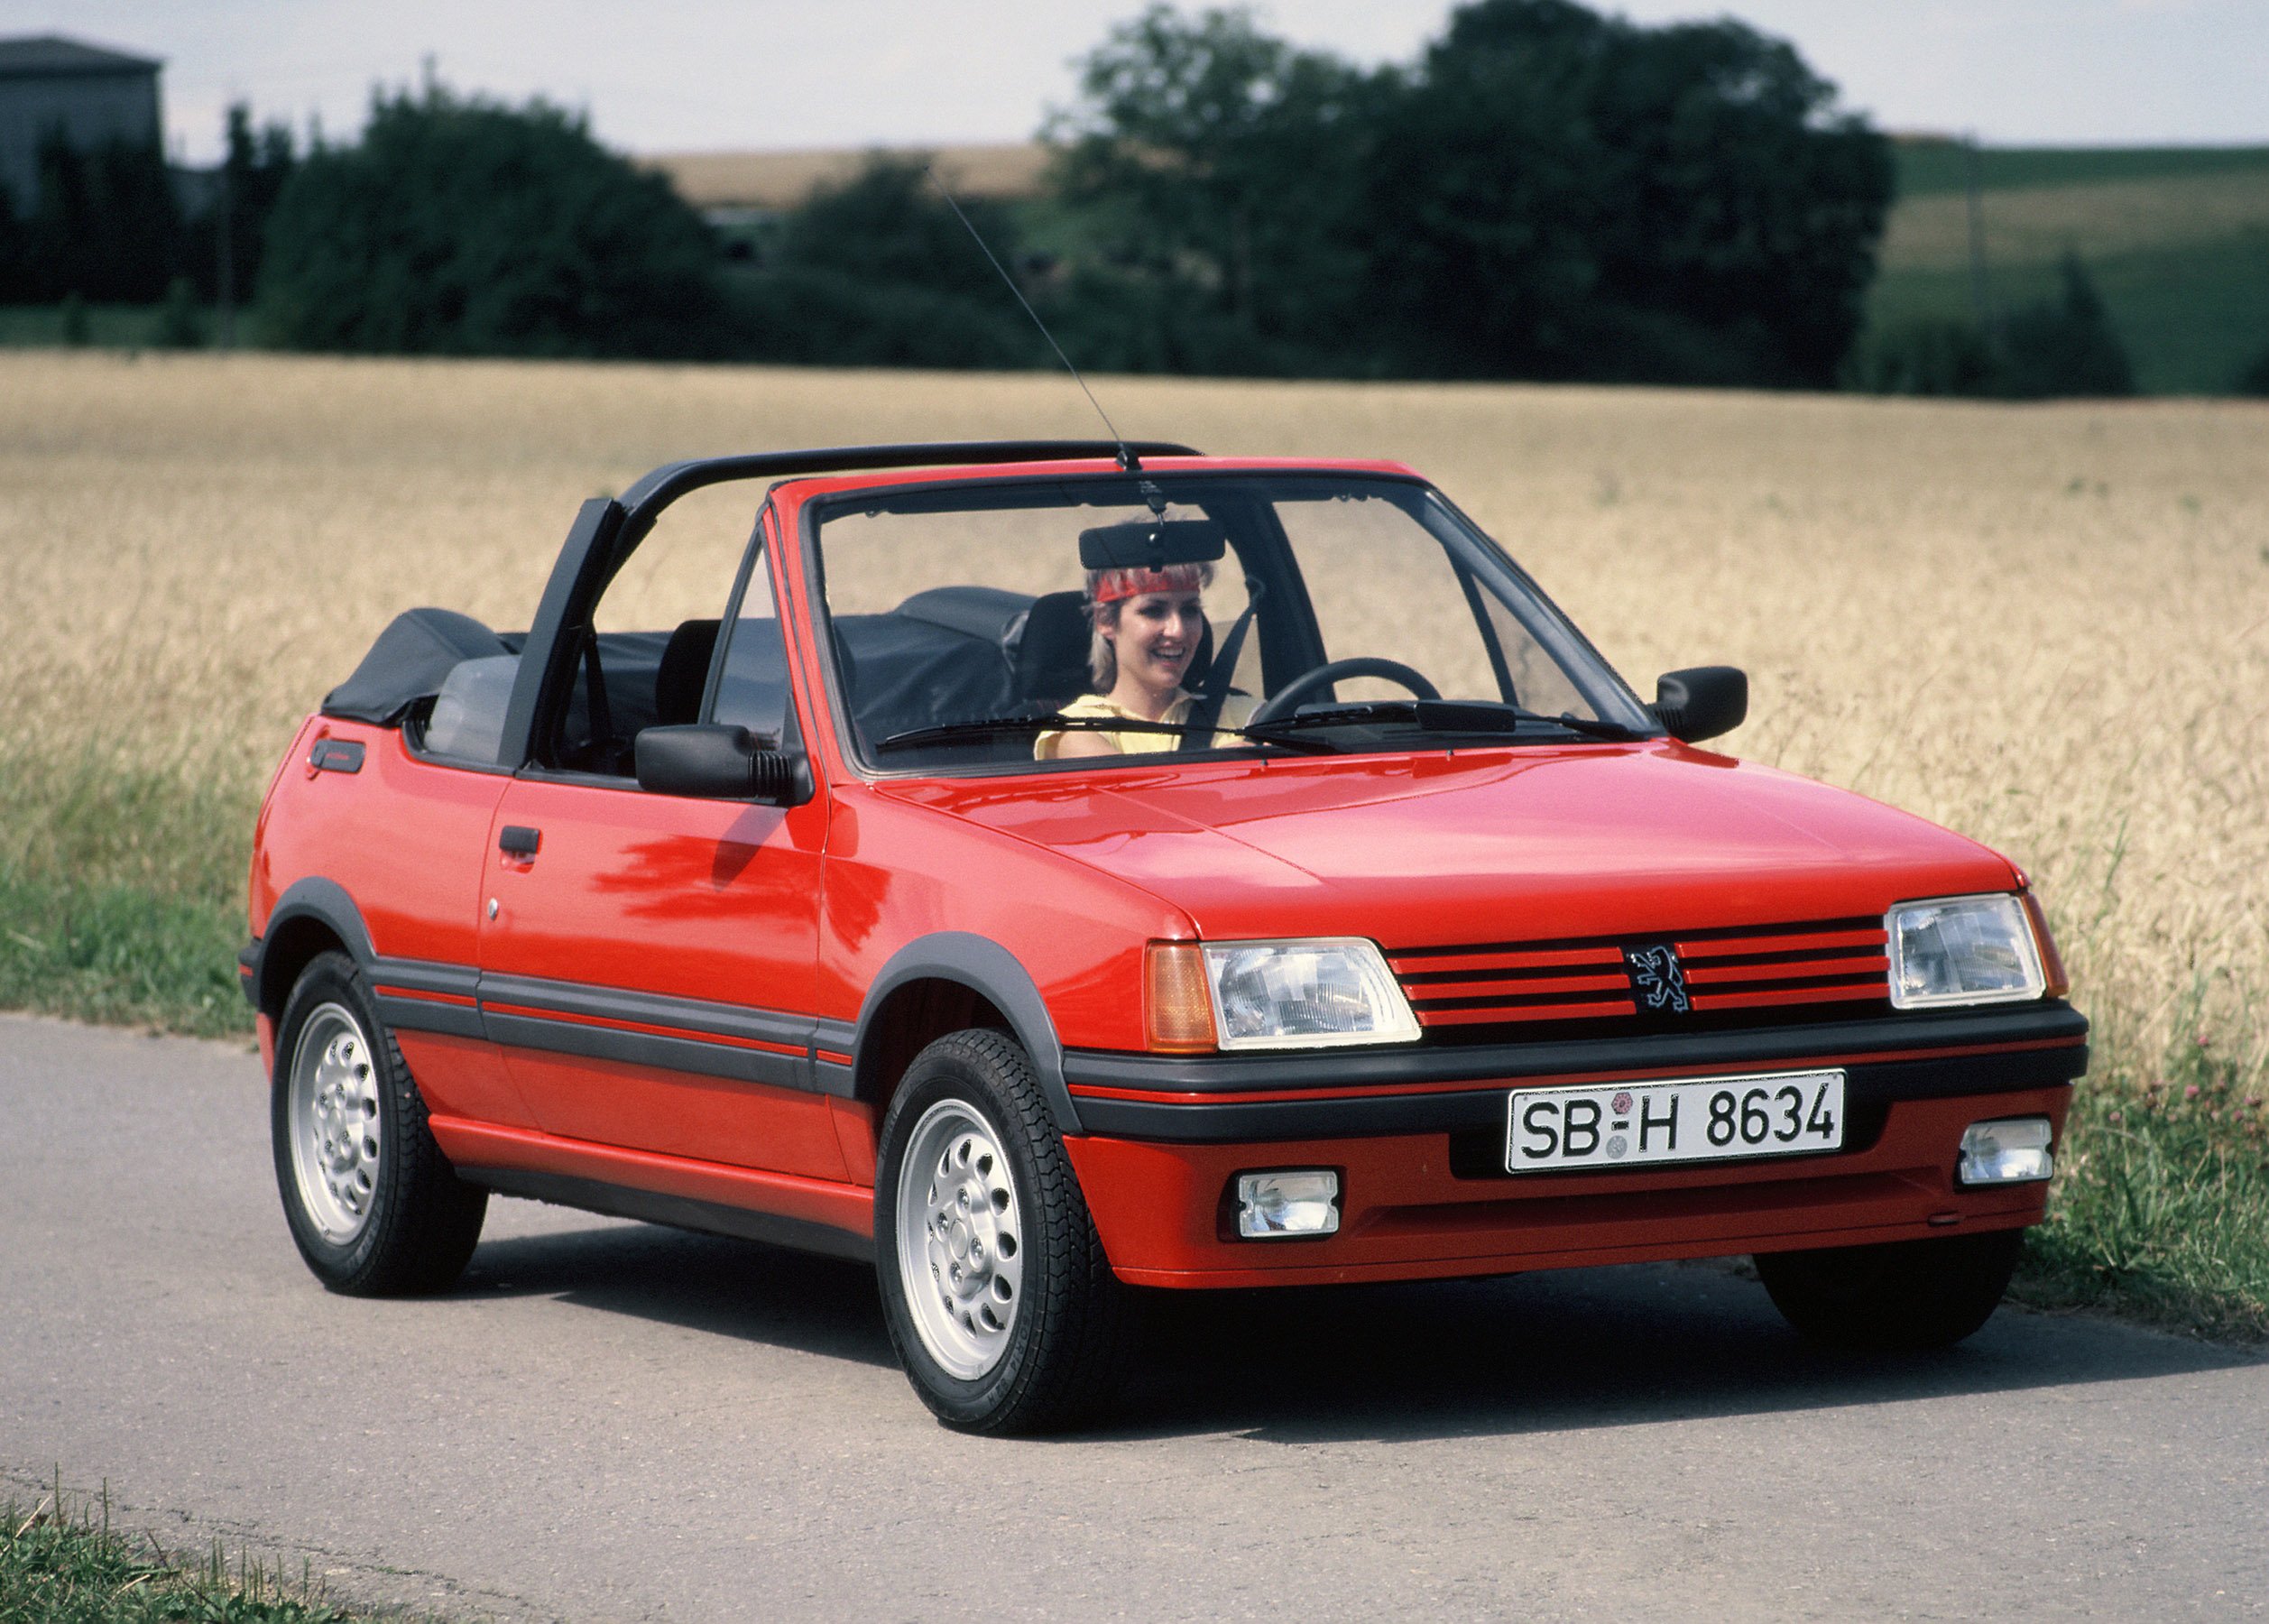 peugeot, 205, 1600, Cti, Cabriolet, Cars, French Wallpaper